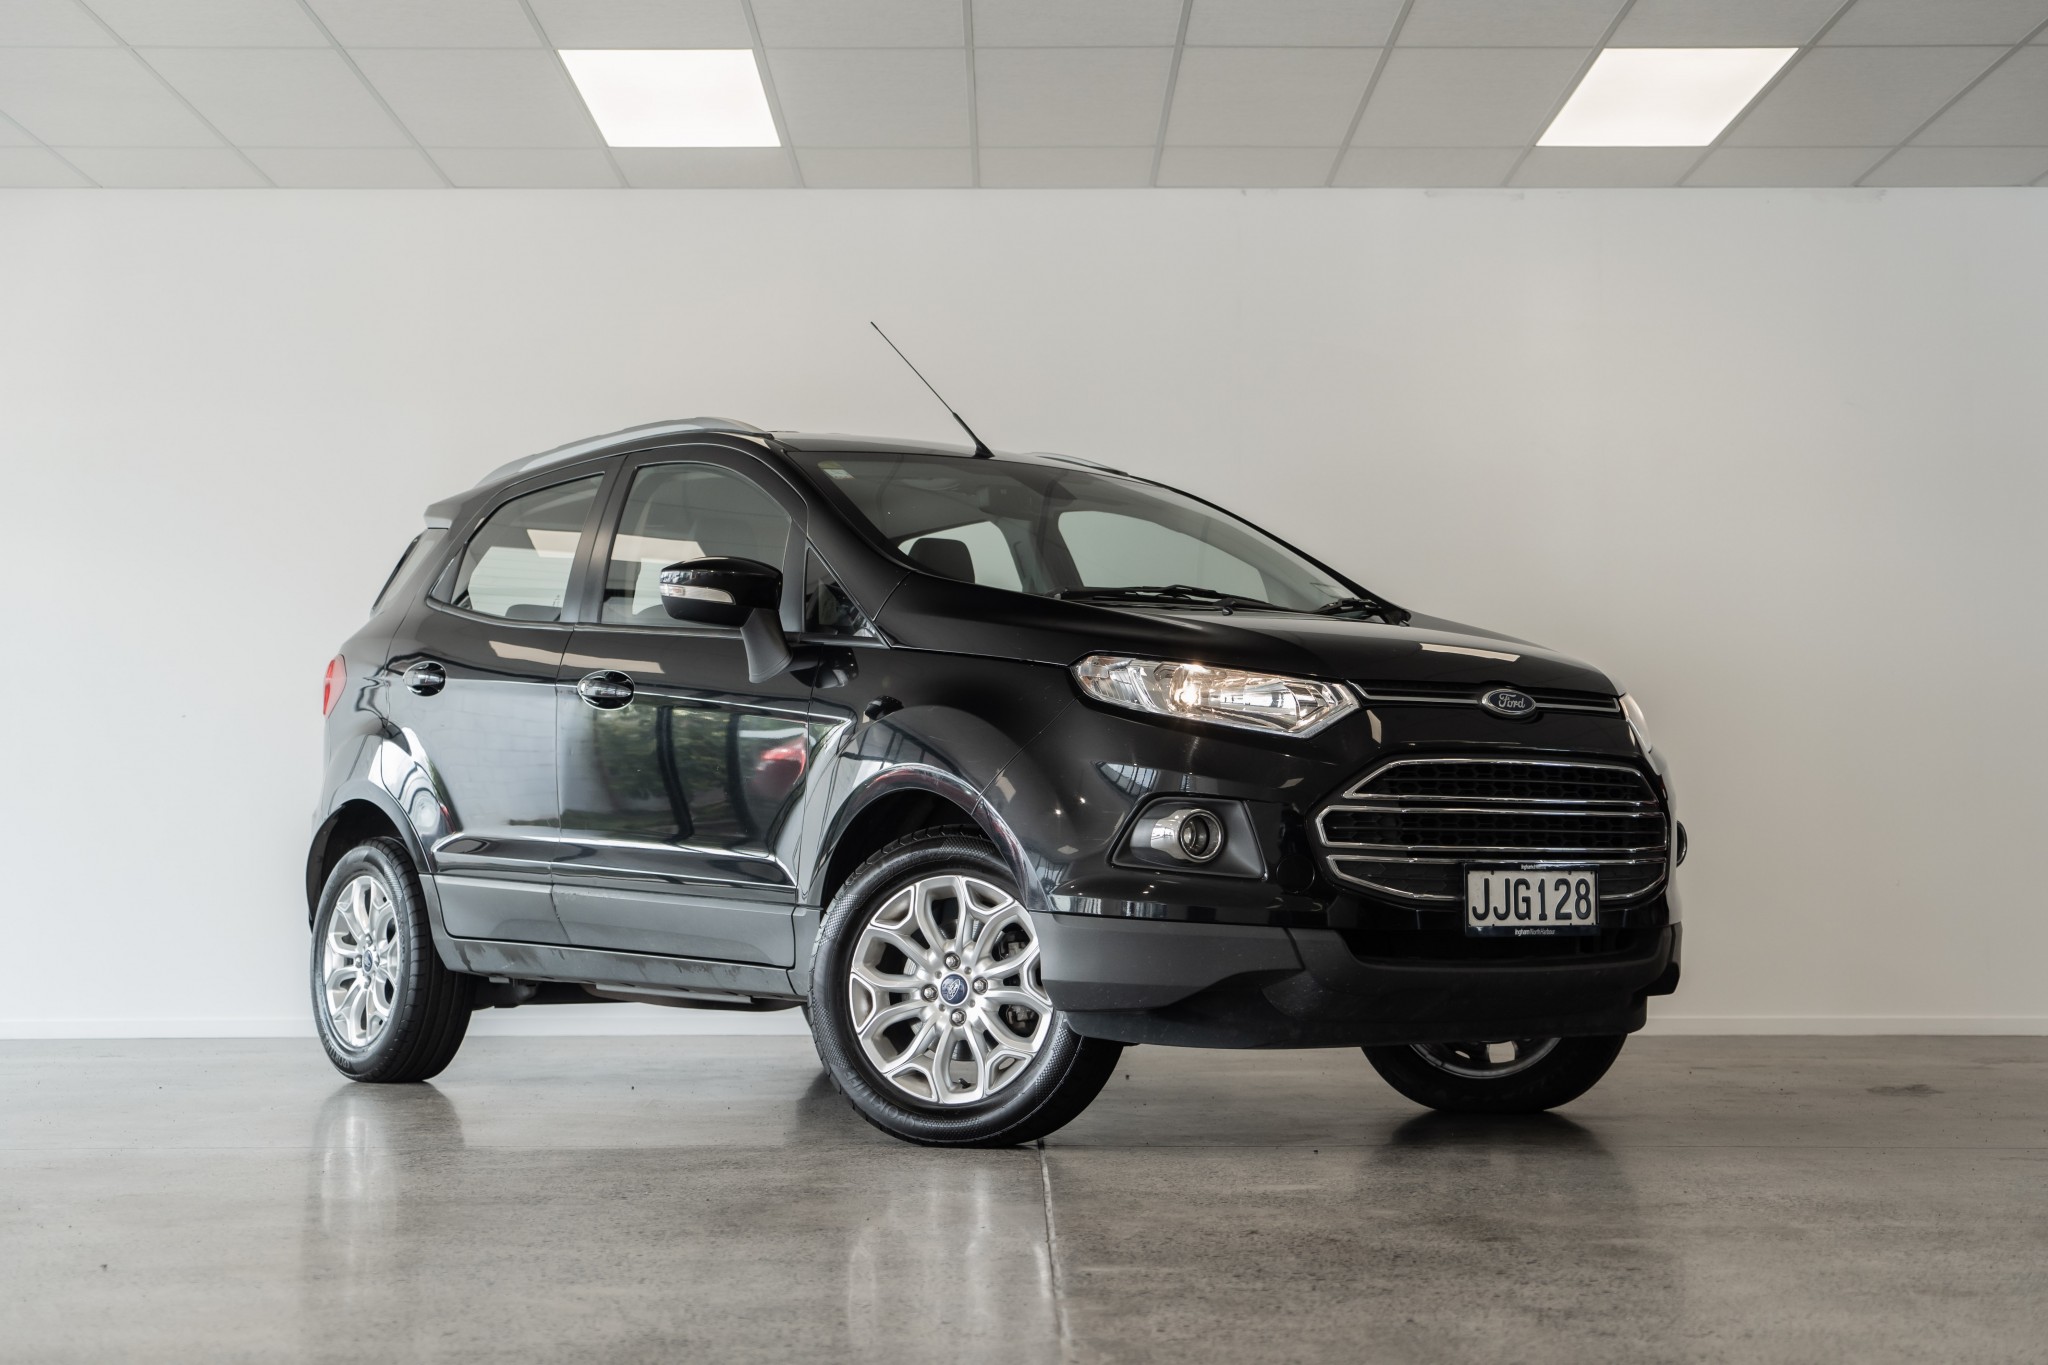 Enhanced Ford EcoSport Compact SUV Now Available To Order, 46% OFF